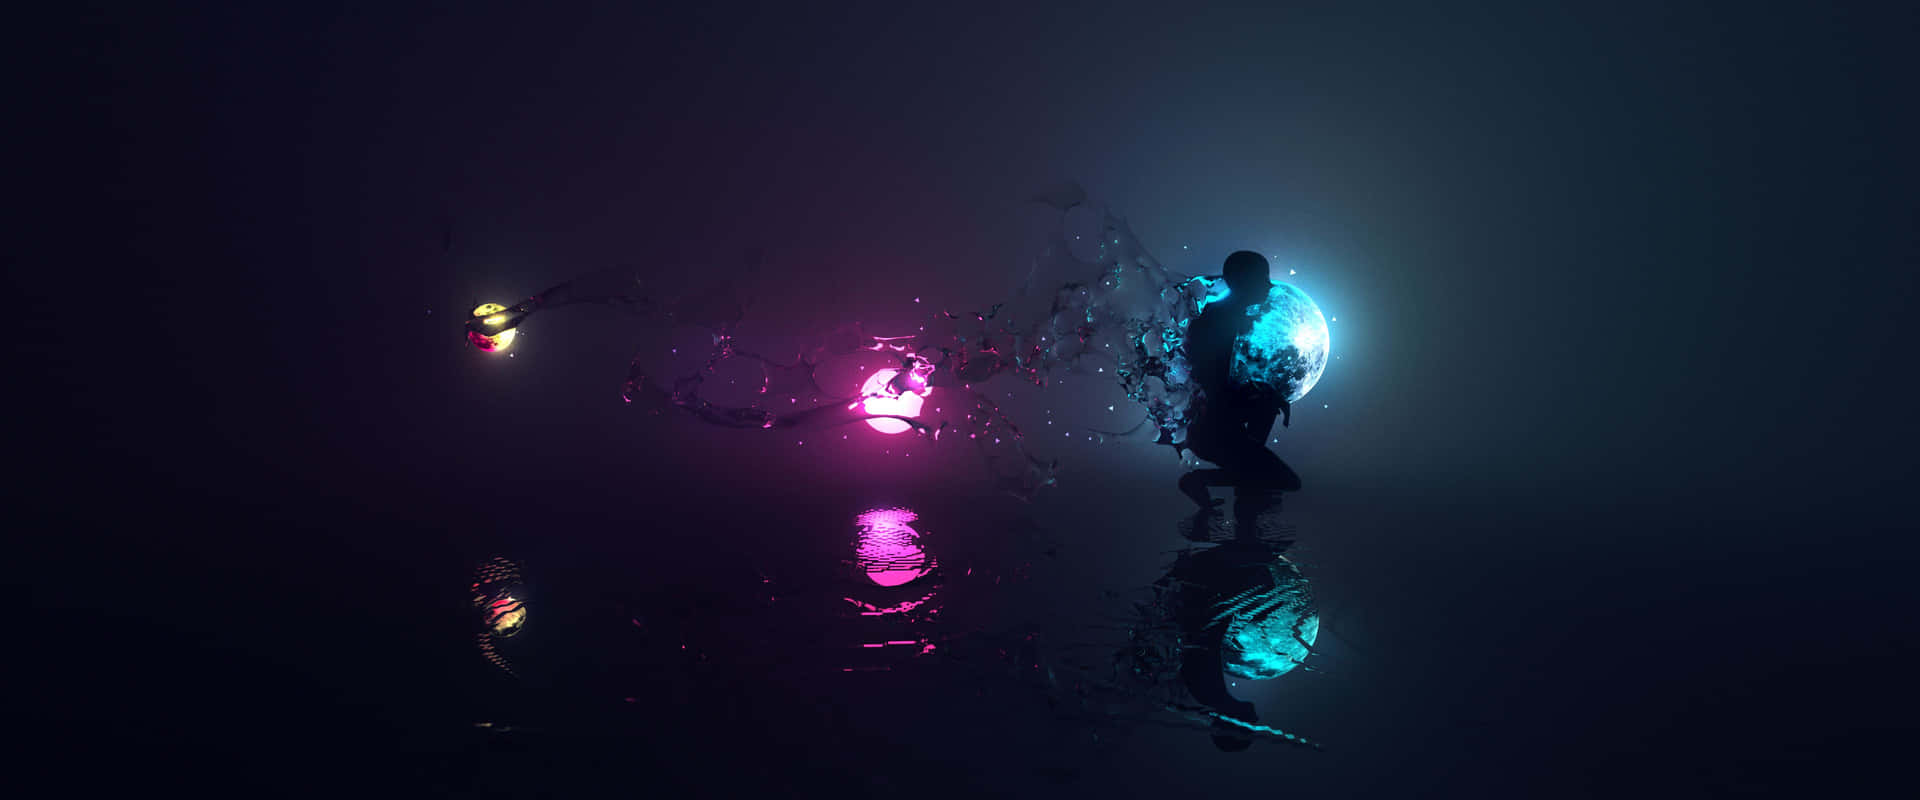 A Person Walking In The Dark With Glowing Lights Wallpaper